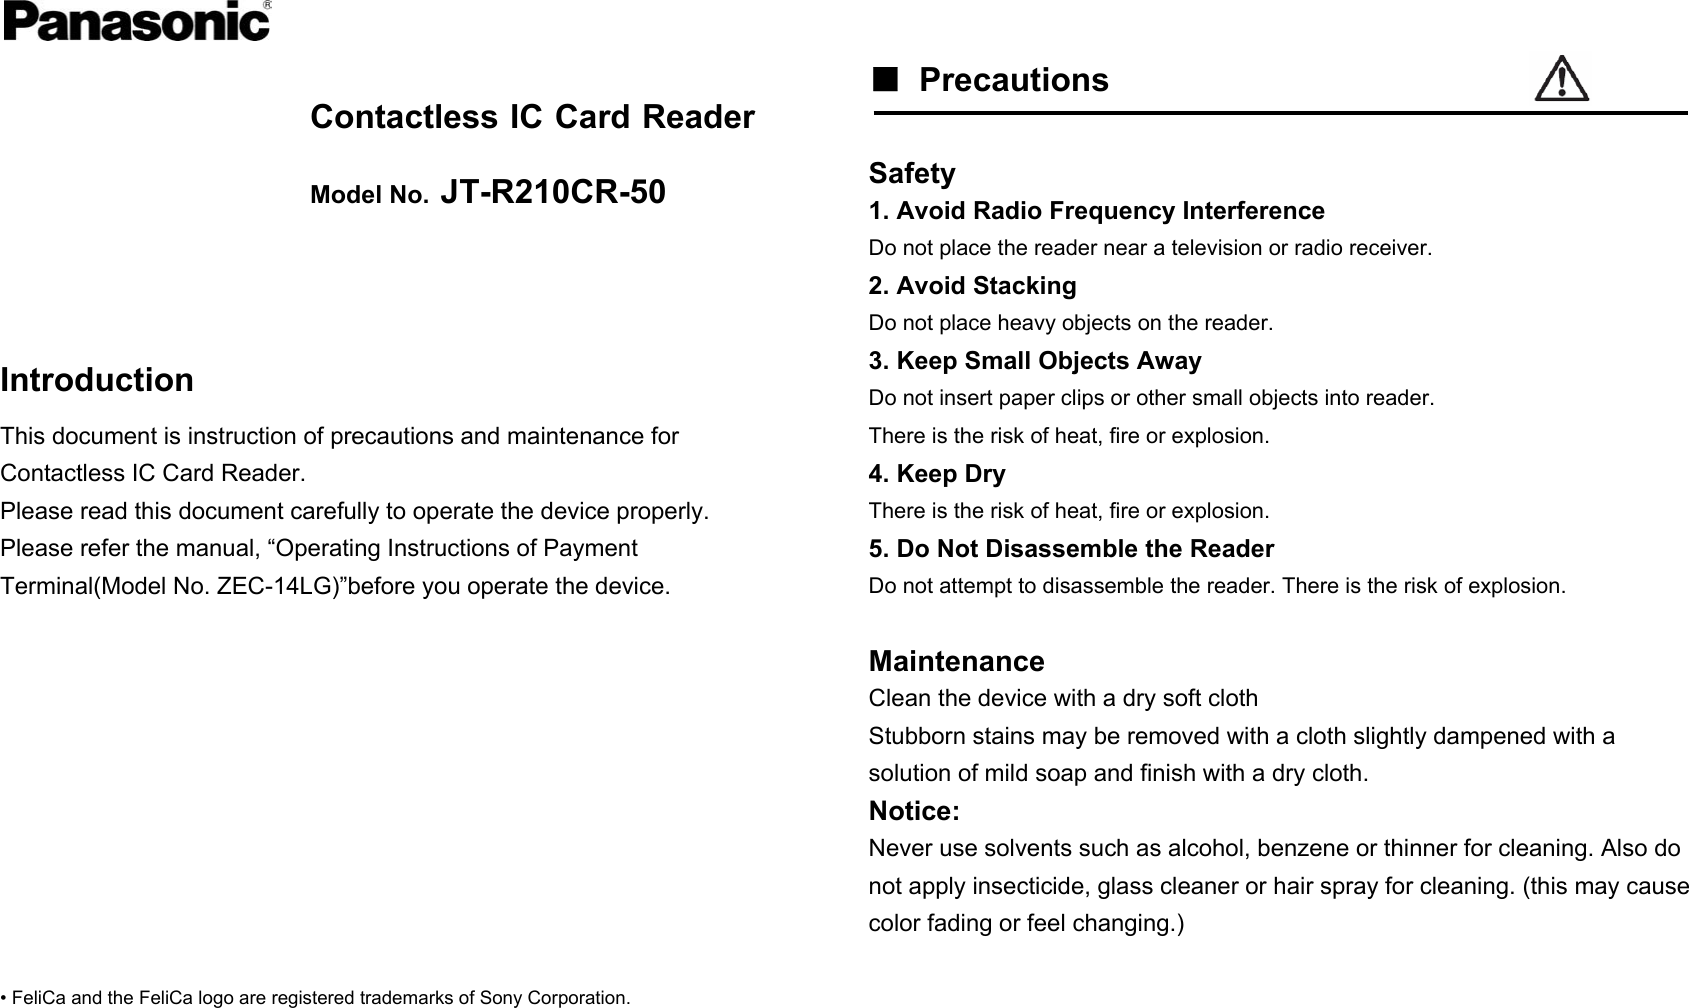   Contactless IC Card Reader Model No. JT-R210CR-50    Introduction This document is instruction of precautions and maintenance for Contactless IC Card Reader. Please read this document carefully to operate the device properly. Please refer the manual, “Operating Instructions of Payment Terminal(Model No. ZEC-14LG)”before you operate the device.           • FeliCa and the FeliCa logo are registered trademarks of Sony Corporation.     ■ Precautions   Safety 1. Avoid Radio Frequency Interference Do not place the reader near a television or radio receiver. 2. Avoid Stacking Do not place heavy objects on the reader. 3. Keep Small Objects Away Do not insert paper clips or other small objects into reader. There is the risk of heat, fire or explosion. 4. Keep Dry There is the risk of heat, fire or explosion. 5. Do Not Disassemble the Reader Do not attempt to disassemble the reader. There is the risk of explosion.  Maintenance Clean the device with a dry soft cloth Stubborn stains may be removed with a cloth slightly dampened with a solution of mild soap and finish with a dry cloth. Notice: Never use solvents such as alcohol, benzene or thinner for cleaning. Also do not apply insecticide, glass cleaner or hair spray for cleaning. (this may cause color fading or feel changing.)  